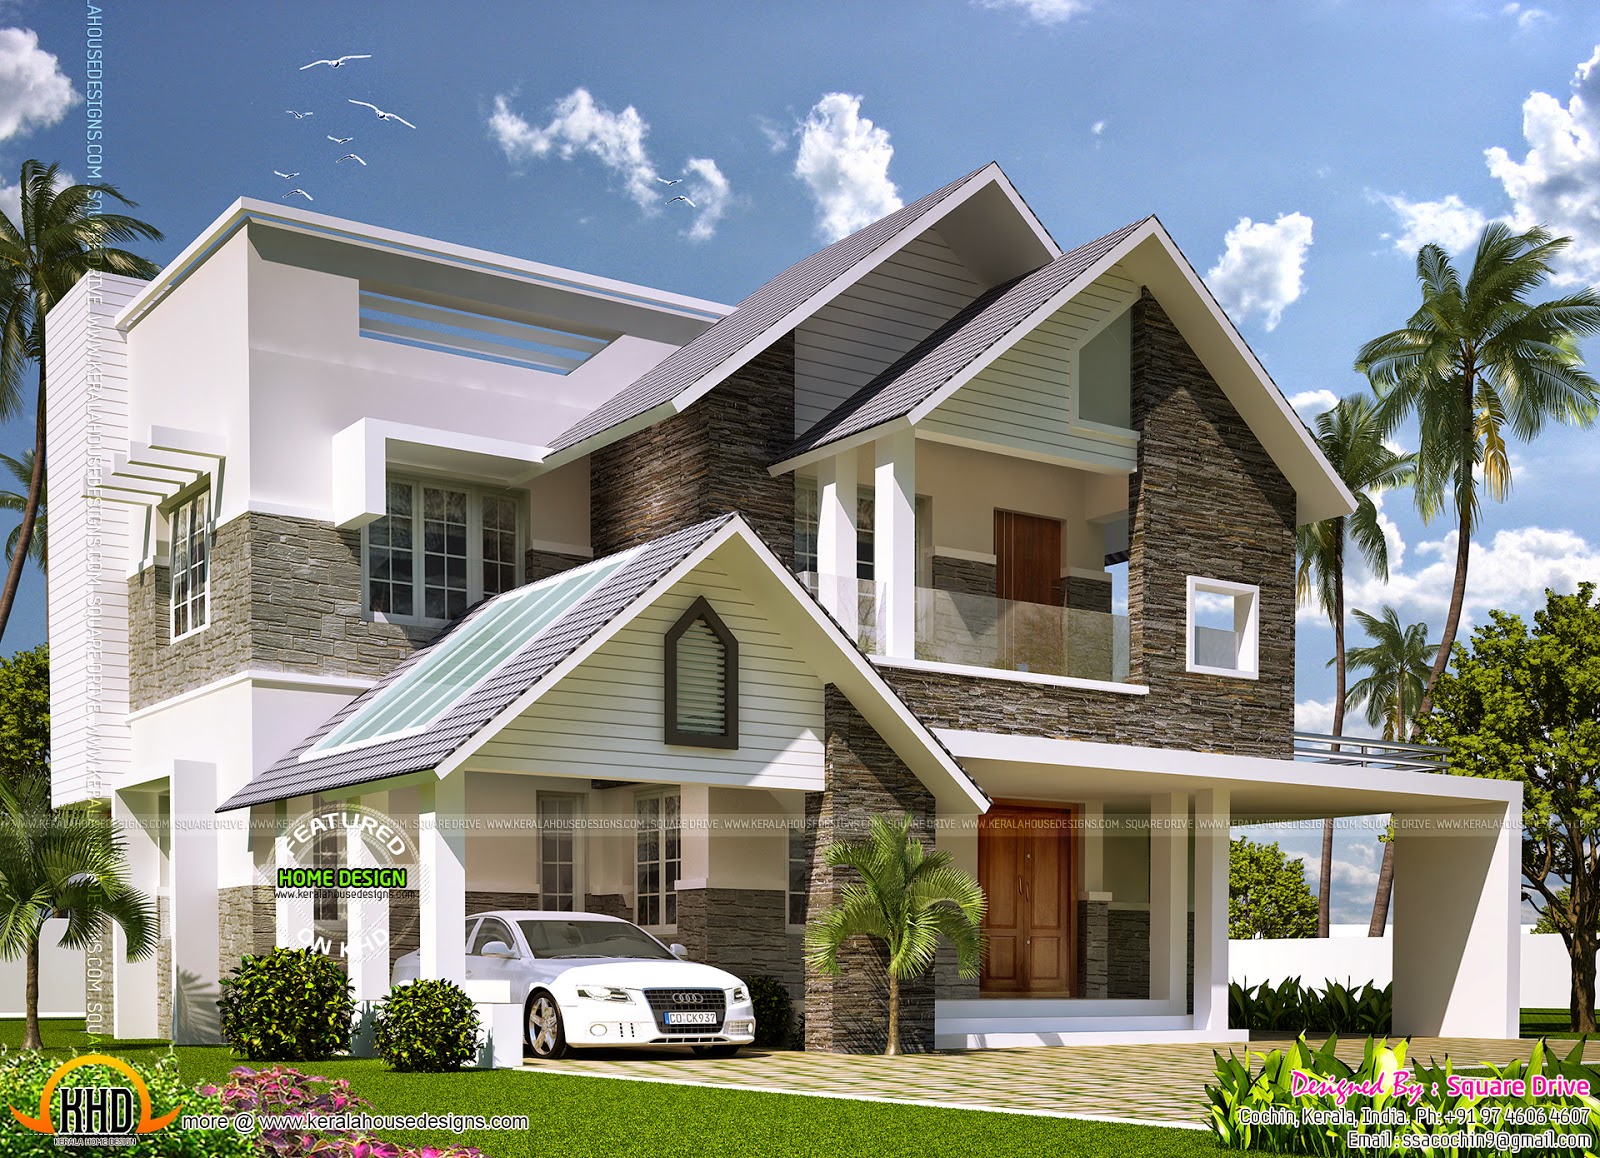 Most modern contemporary house design keralahousedesigns